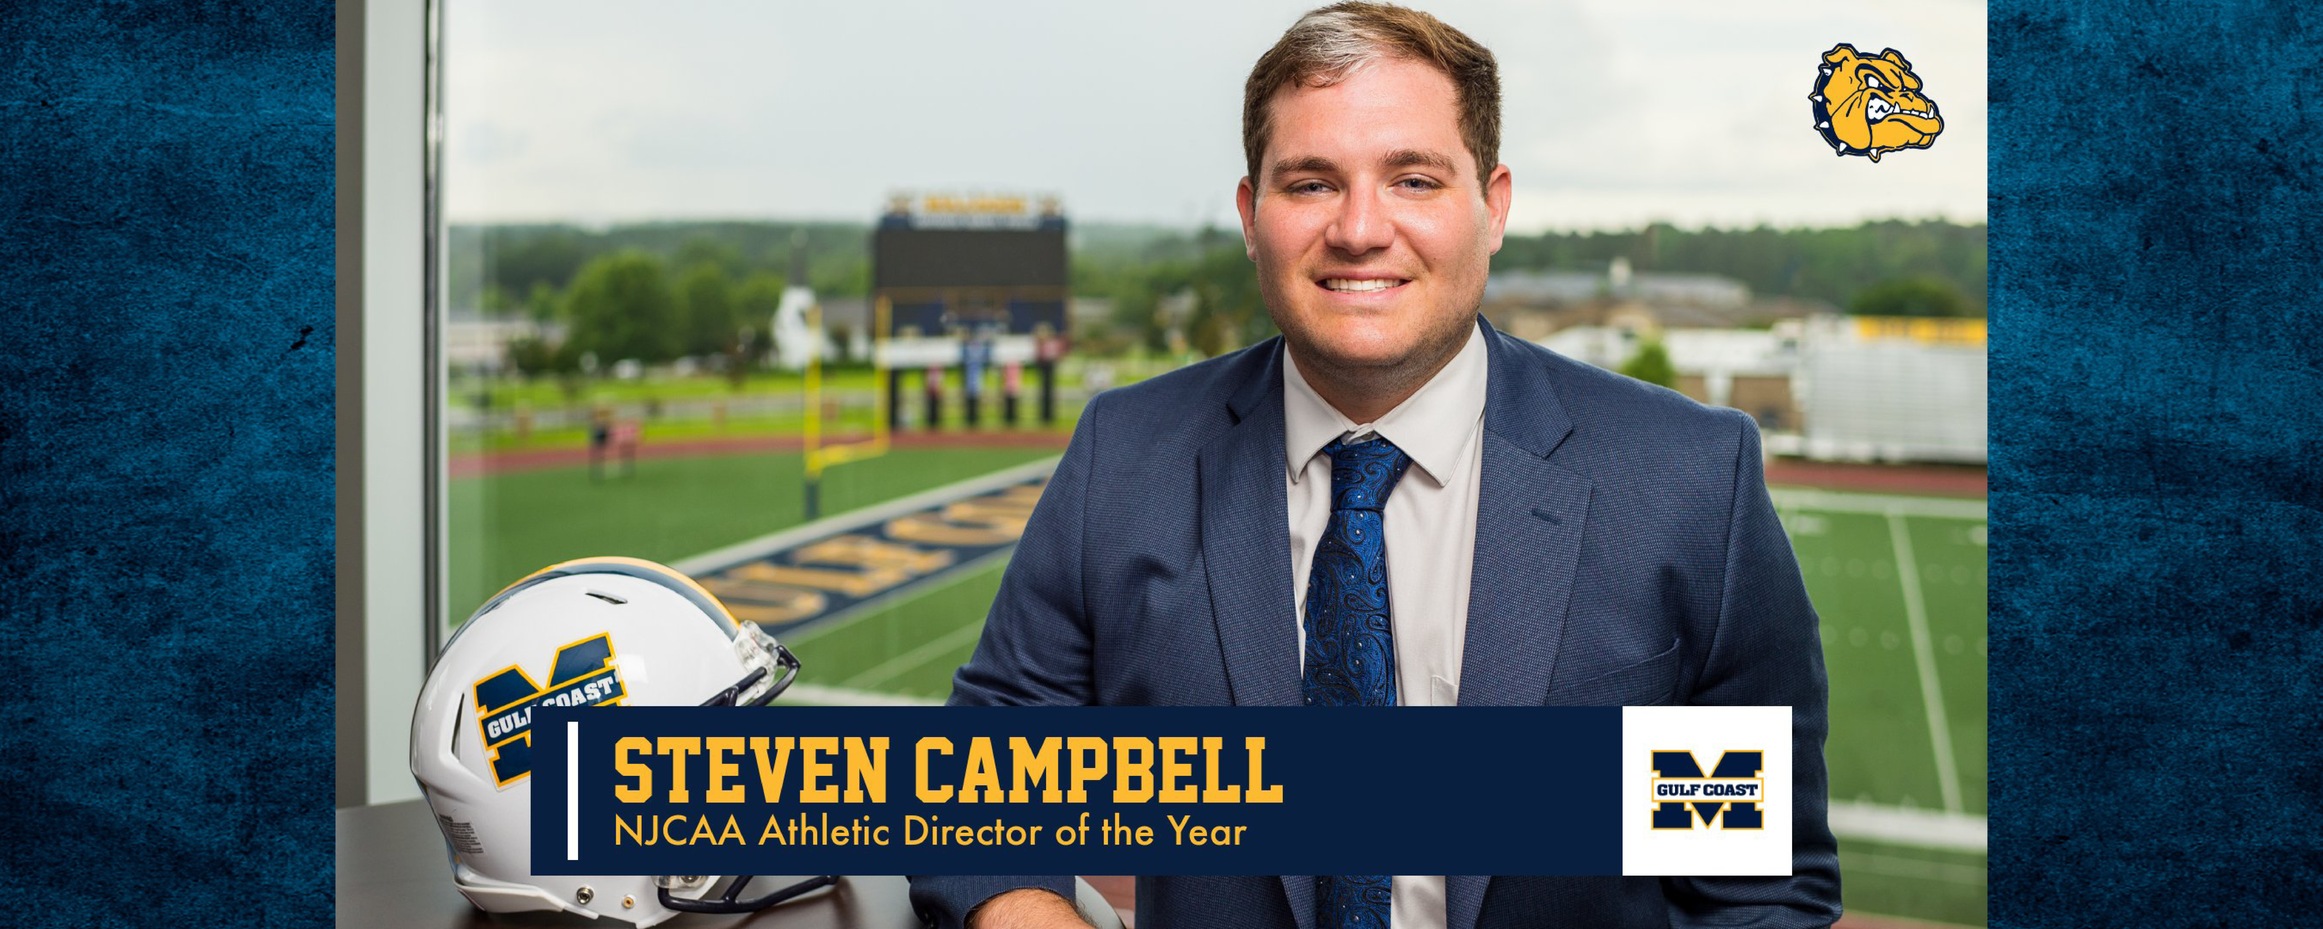 Campbell wins NJCAA AD of the Year